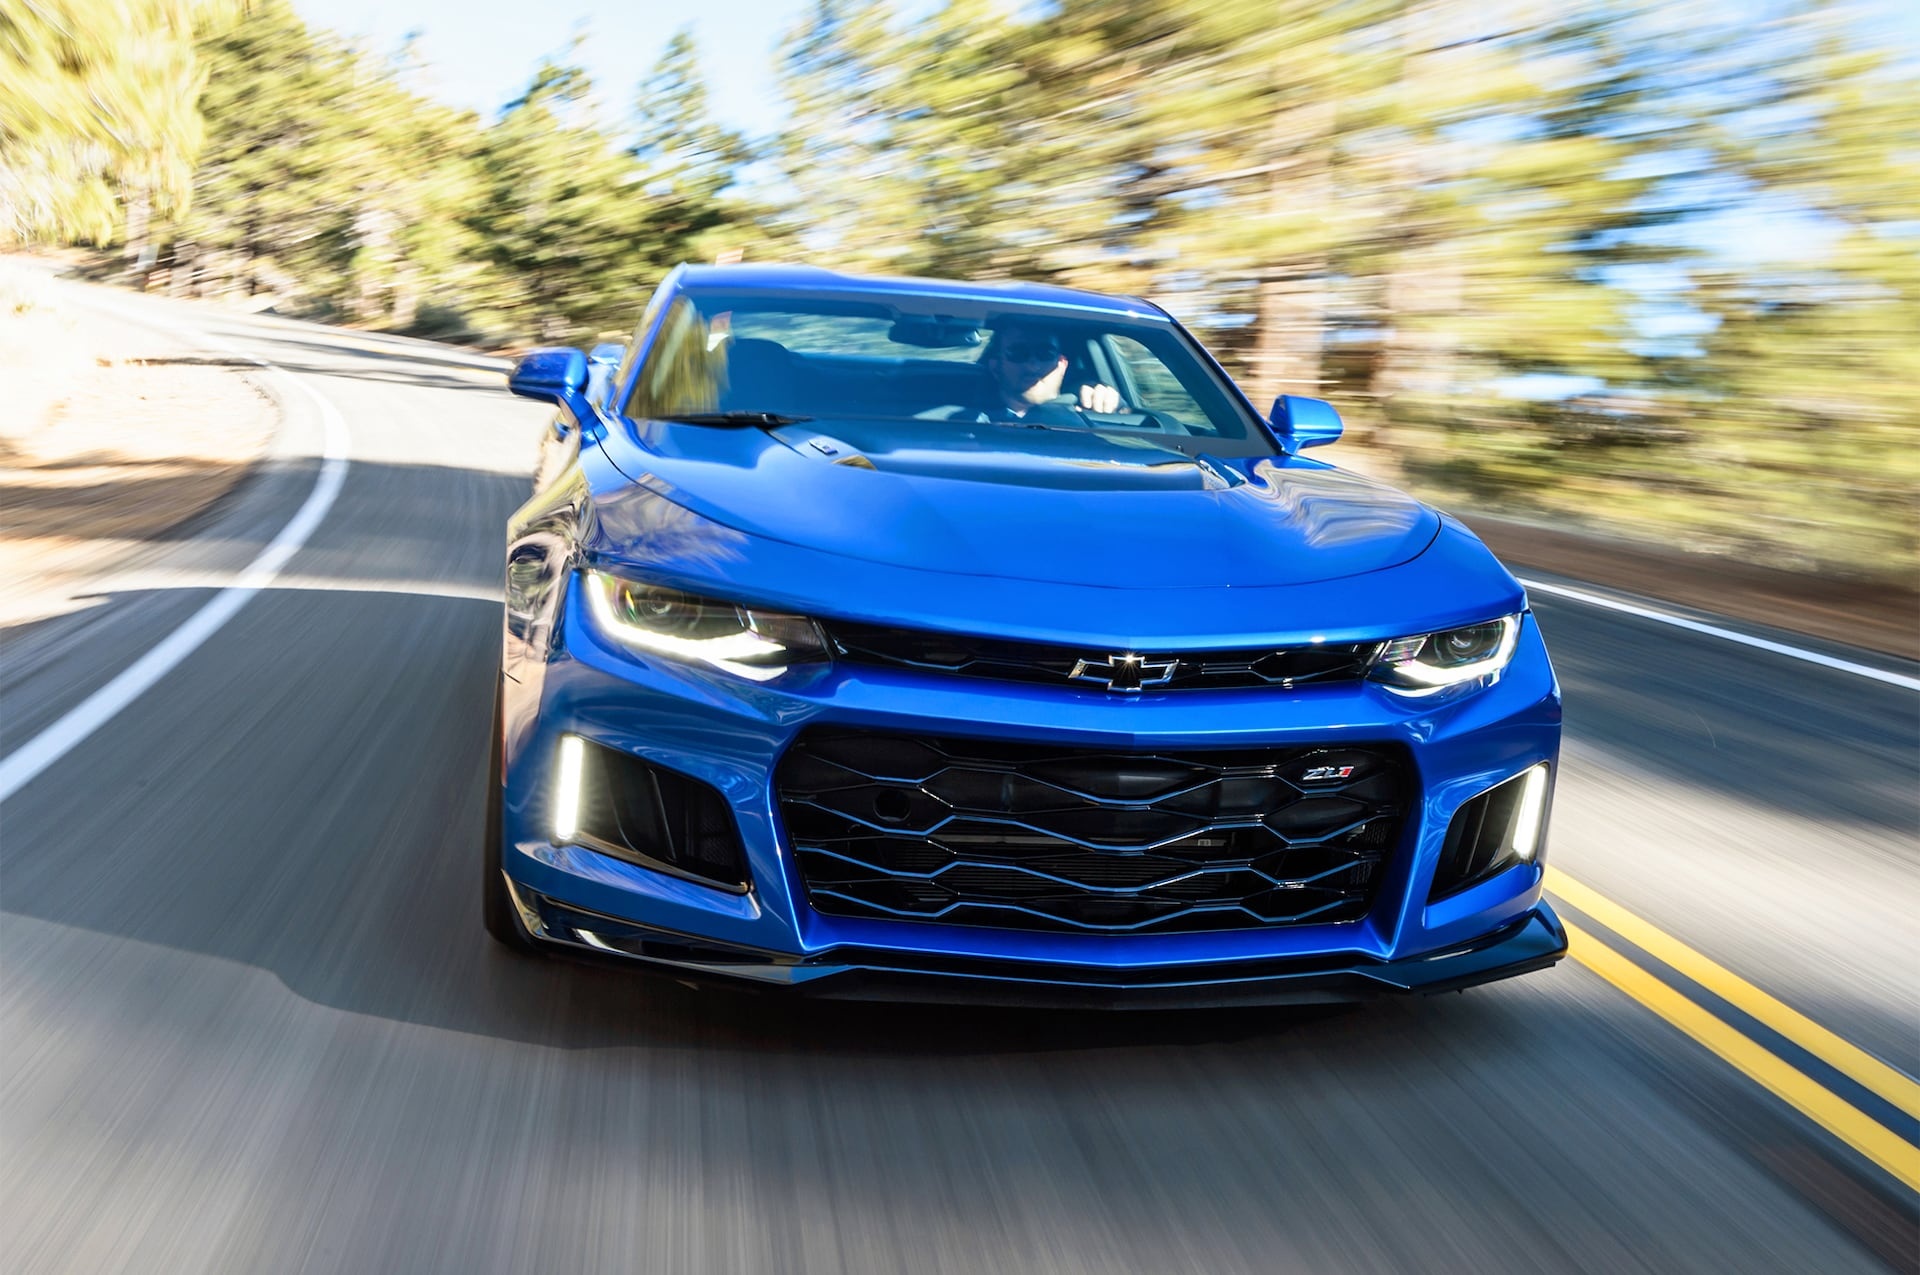 2017 Camaro ZL1, Exciting drive, Unmatched performance, Muscle car power, American speed machine, 1920x1280 HD Desktop